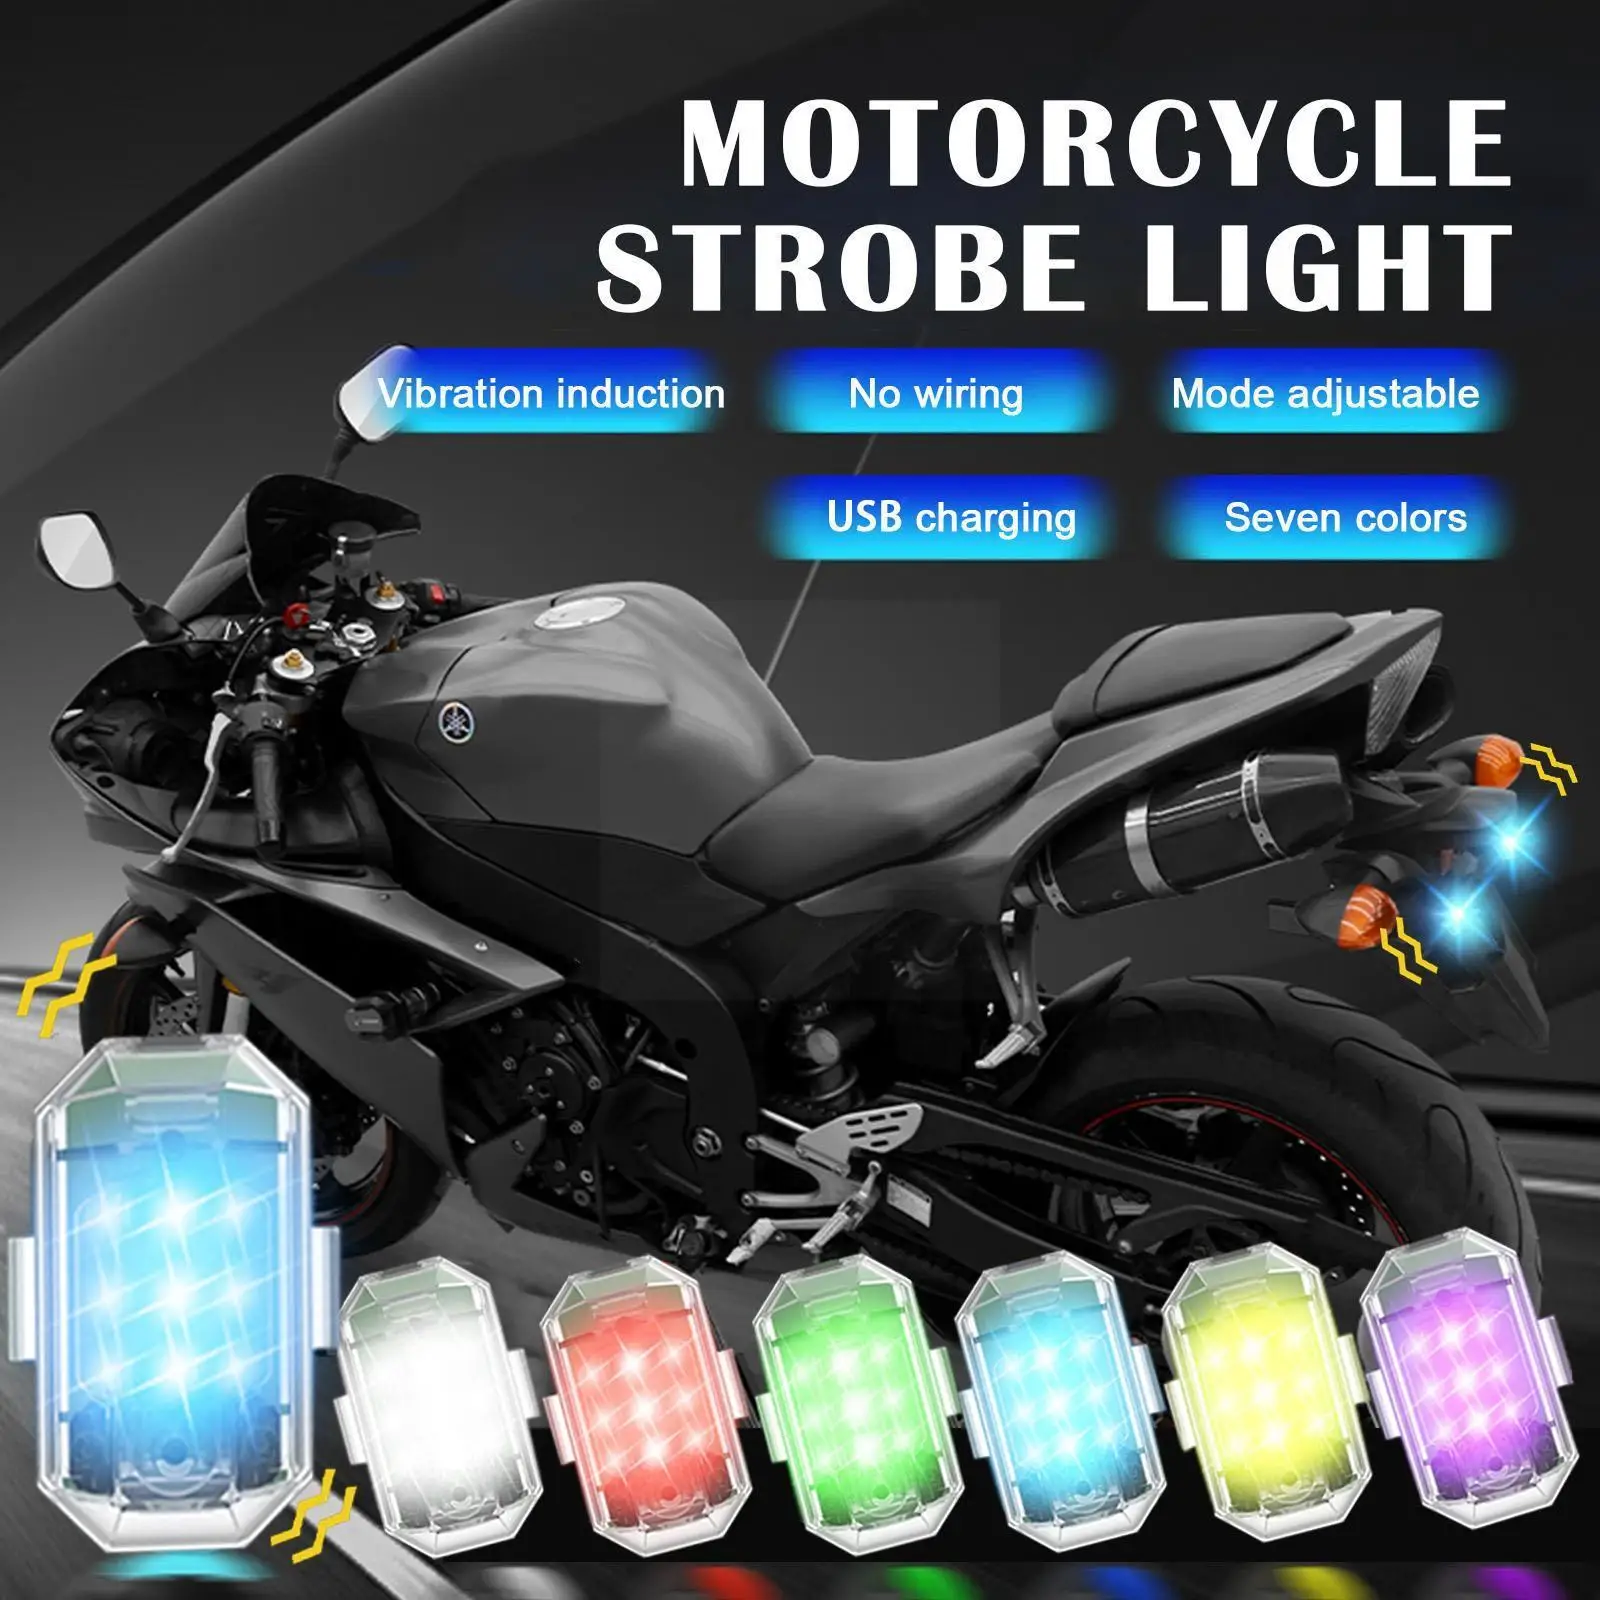 

M3 Motorcycle Strobe Light Usb Rechargeable Warning Lamp For Bikes Modified Drones Aircraft Remote Control Flashing Lights Q9x0